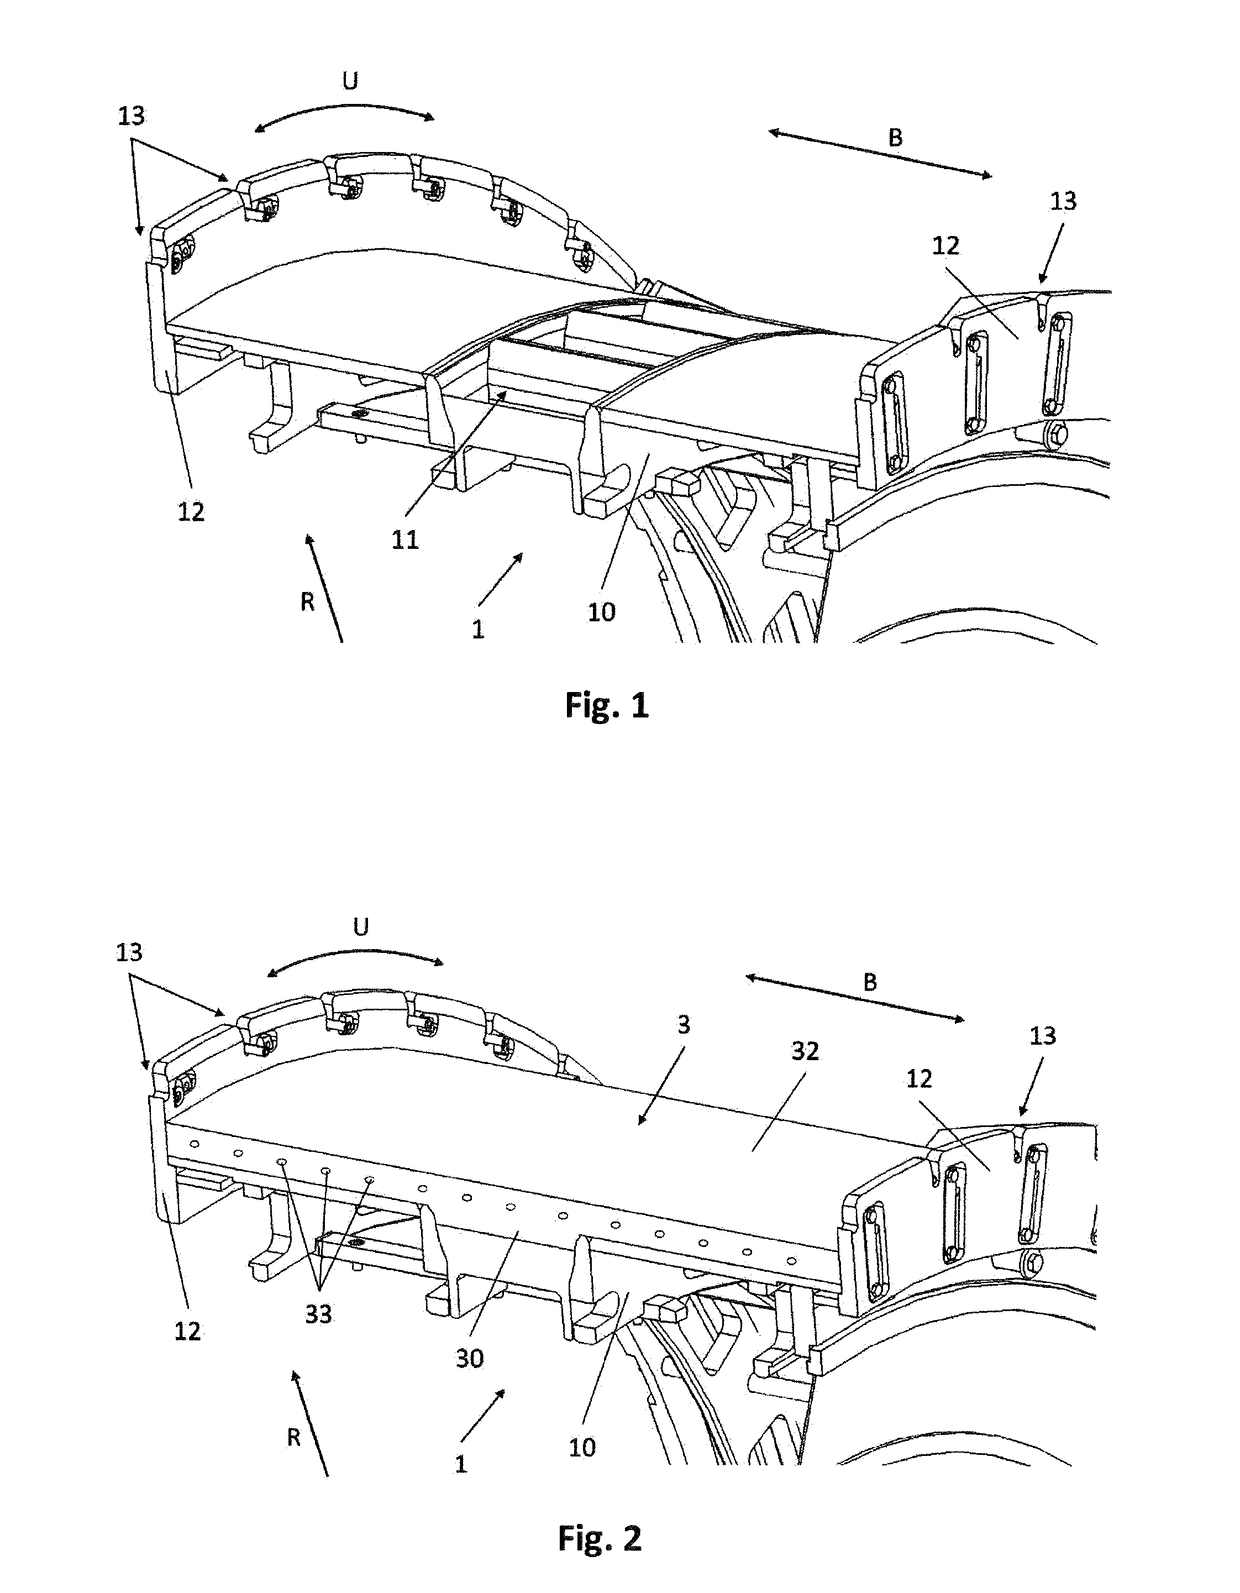 Apparatus and method for producing a rubber caterpillar track with tensile members